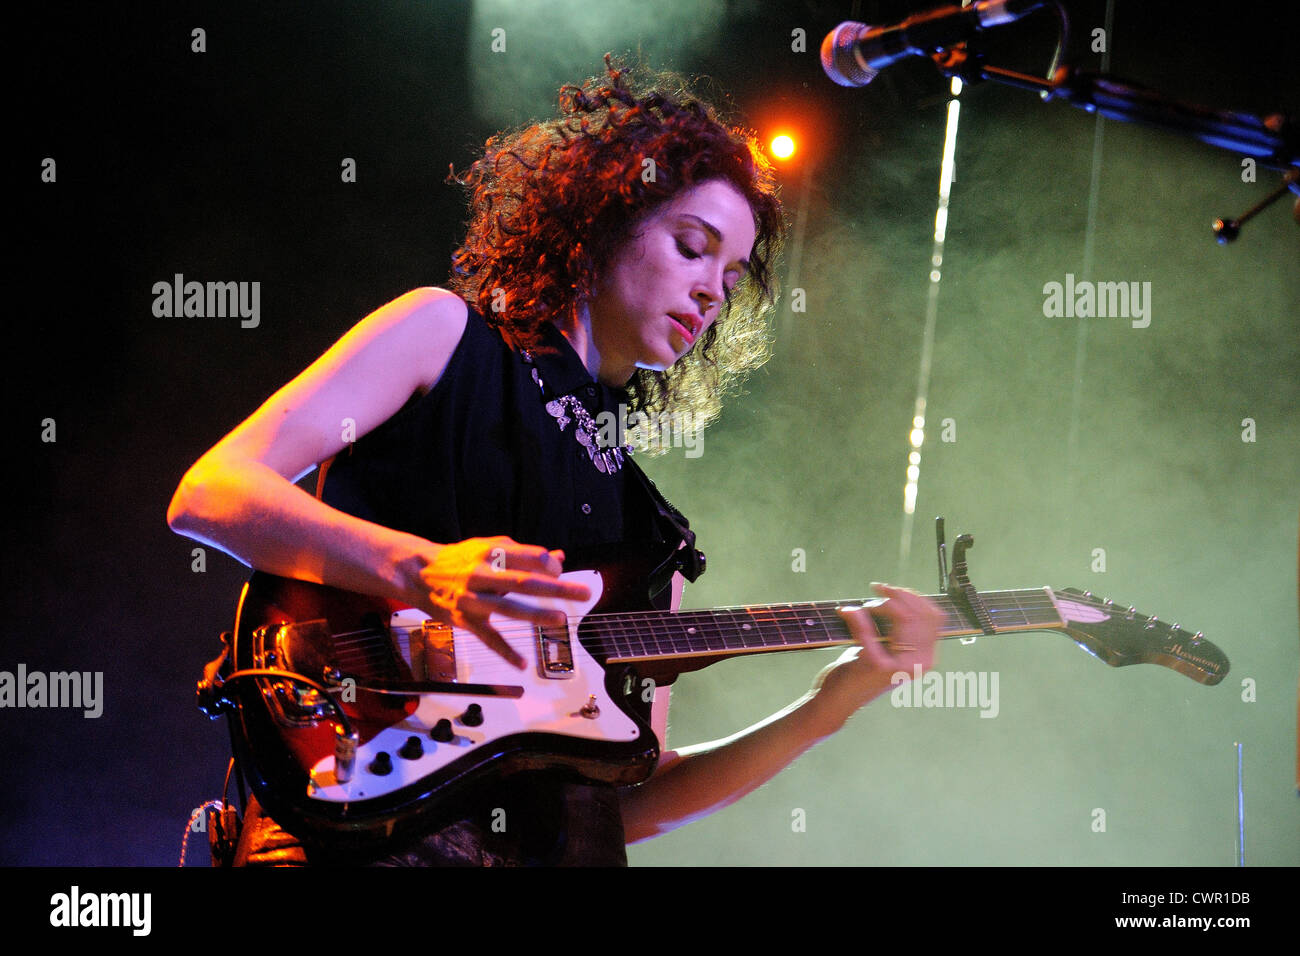 MADRID, SPAIN - JUNE 22: St. Vincent band performs at Dia de la Musica Festival on June 22, 2012 in Madrid, Spain. Stock Photo